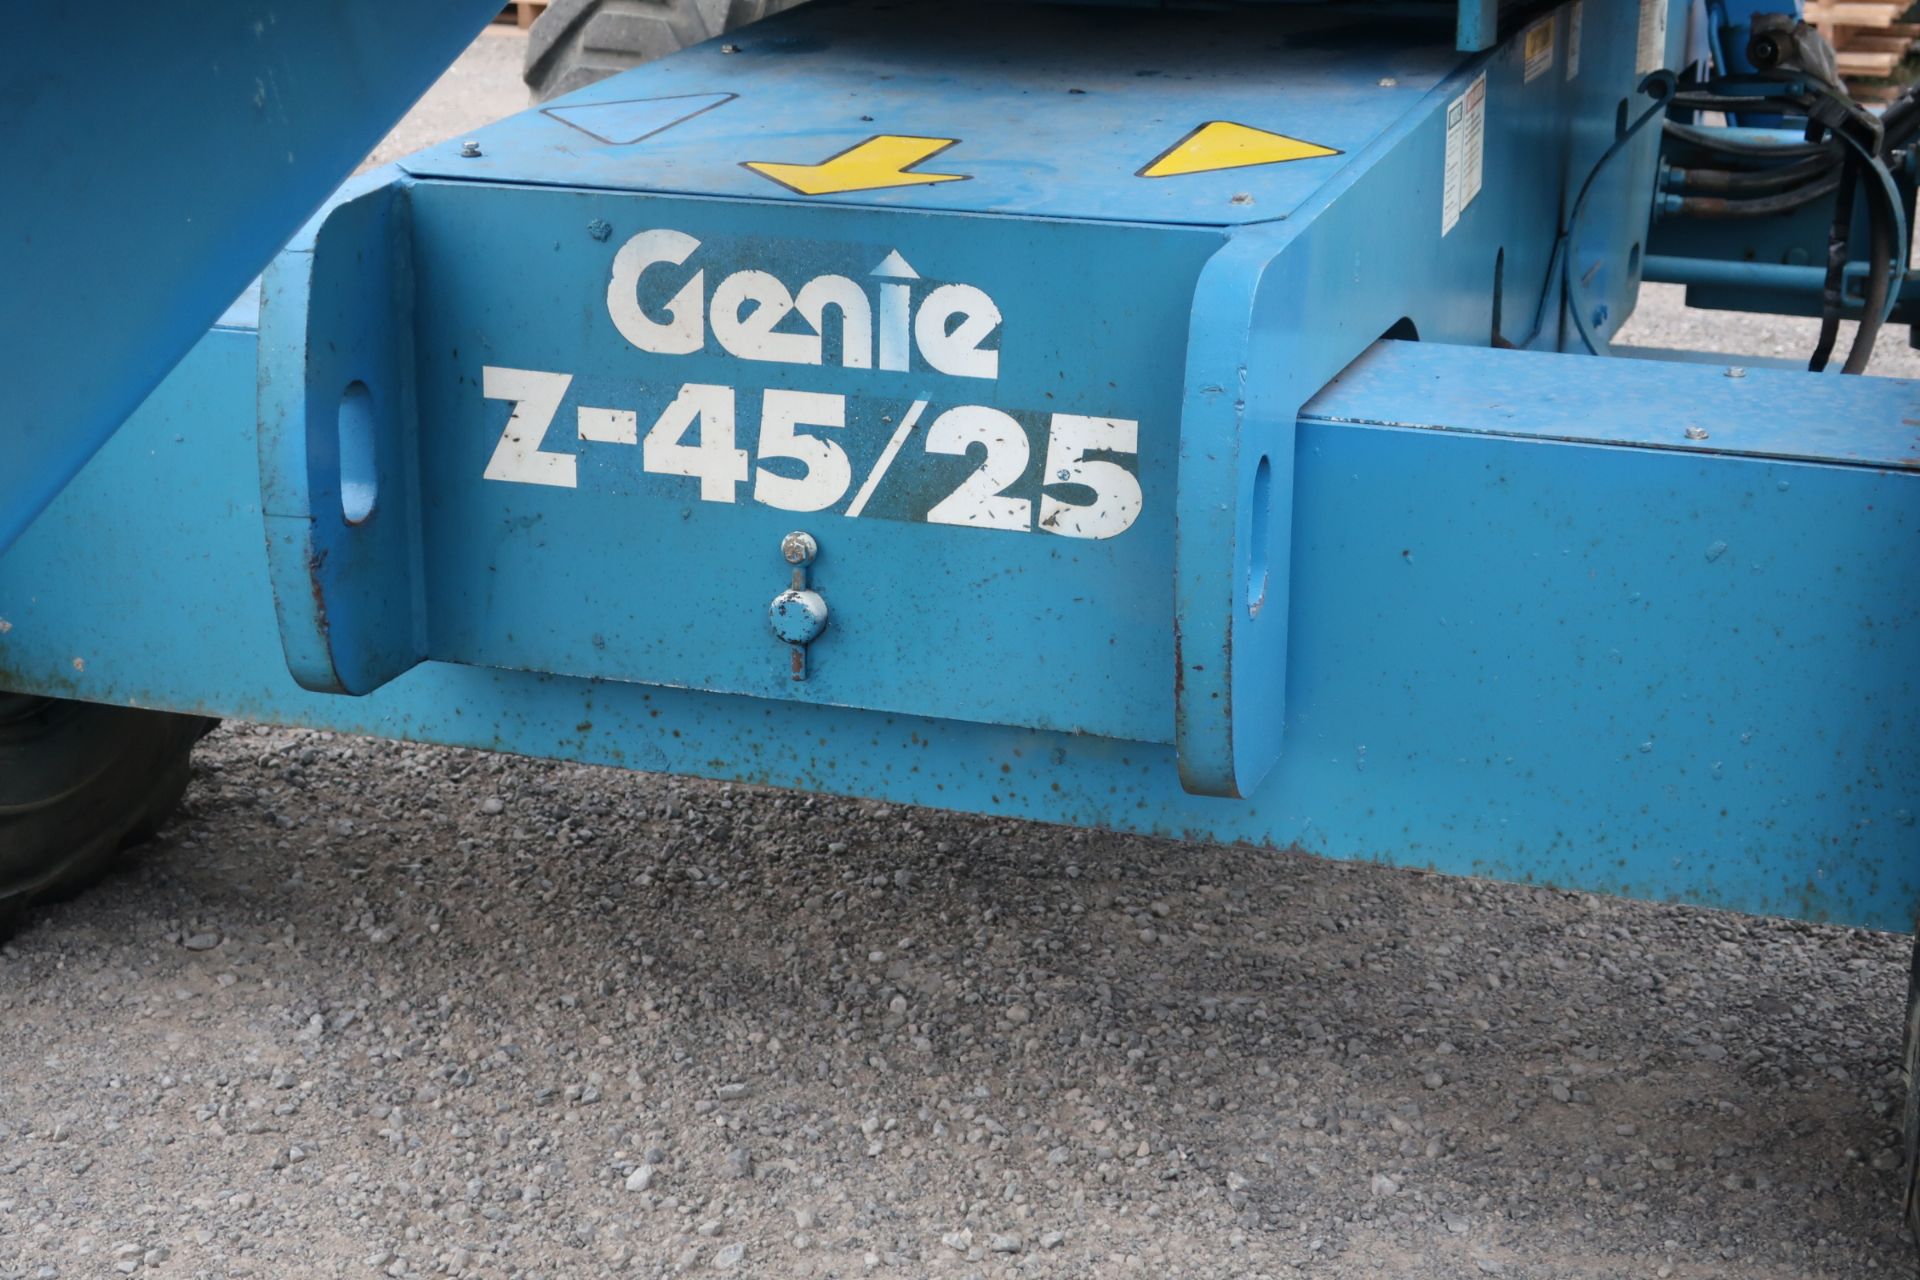 FREE CUSTOMS DOCS & 0 DUTY FEES - MINT Genie Zoom Boom 4x4 Articulating Lift model Z-45/25 45' heigh - Image 6 of 6